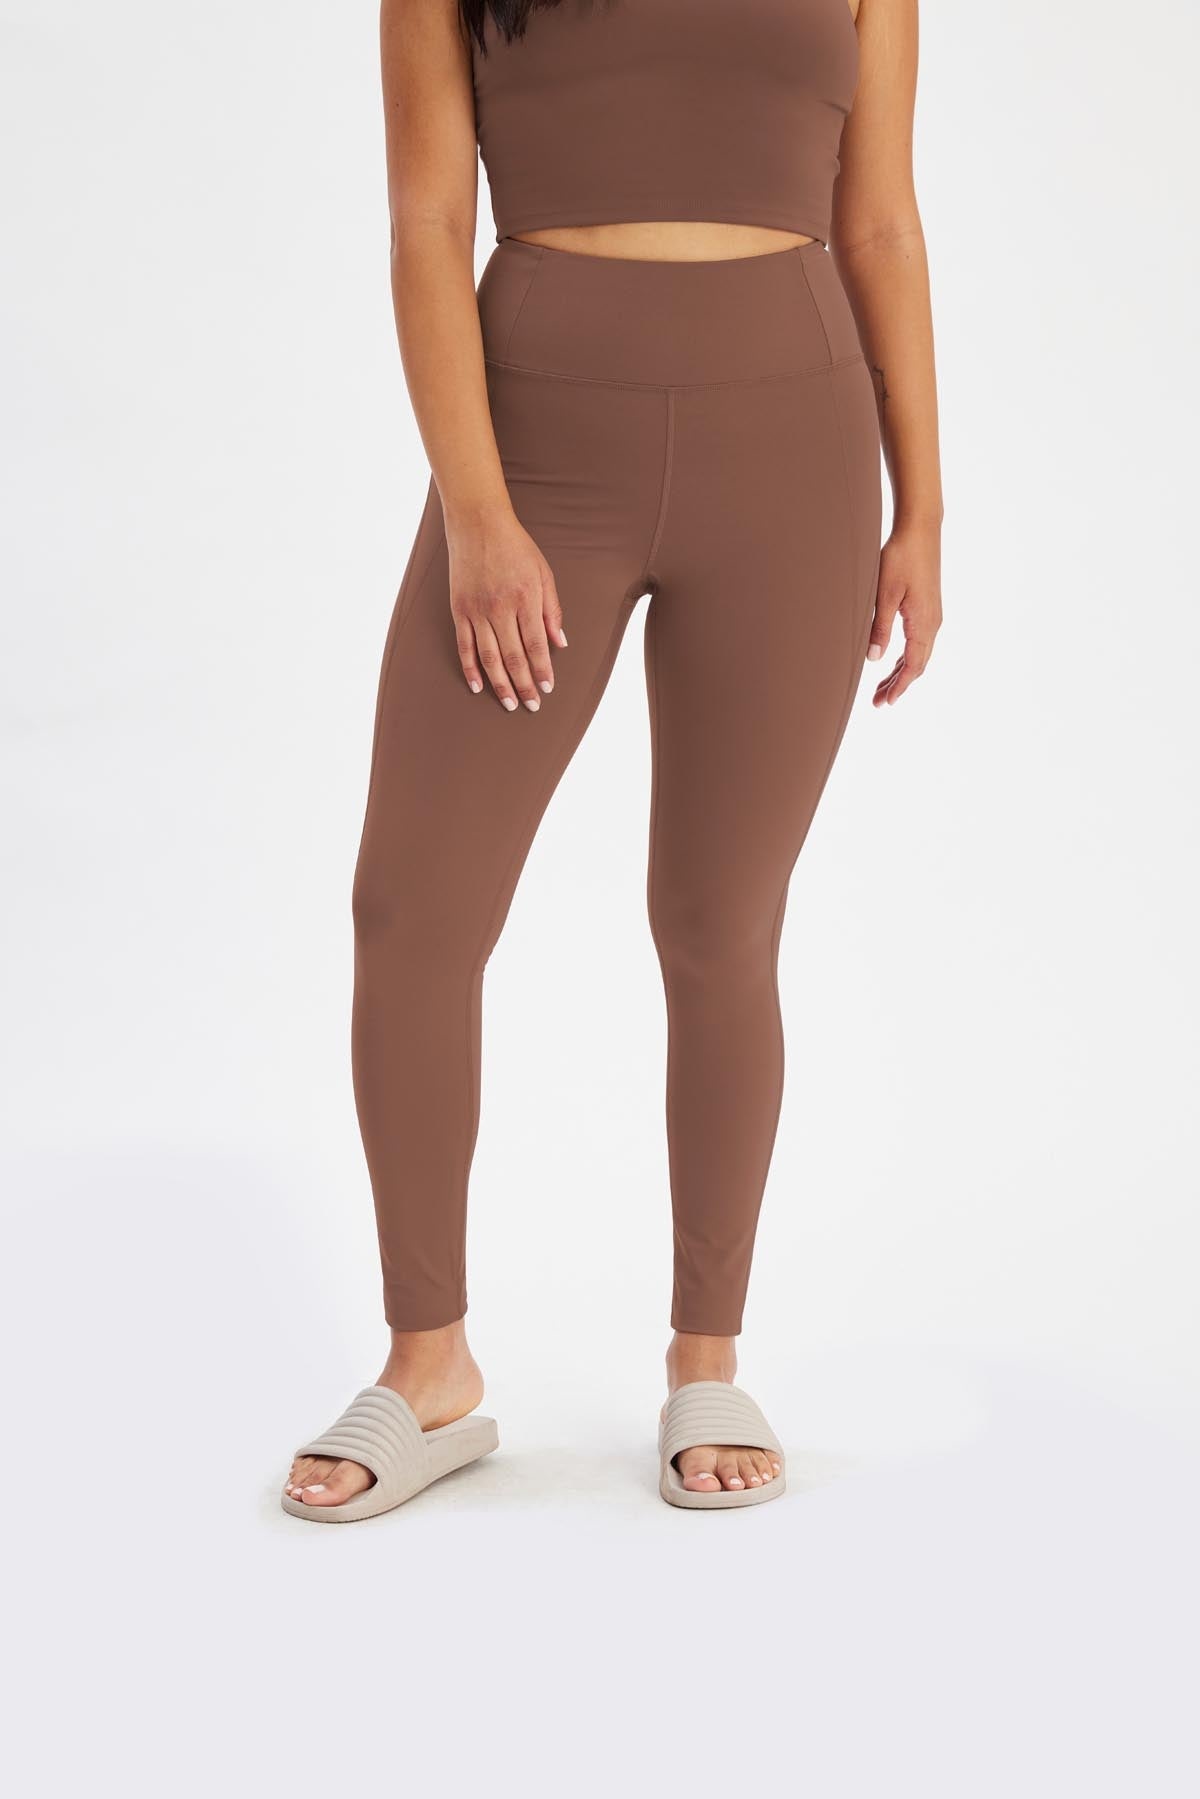 The Compressive High-Rise Legging by Girlfriend Collective